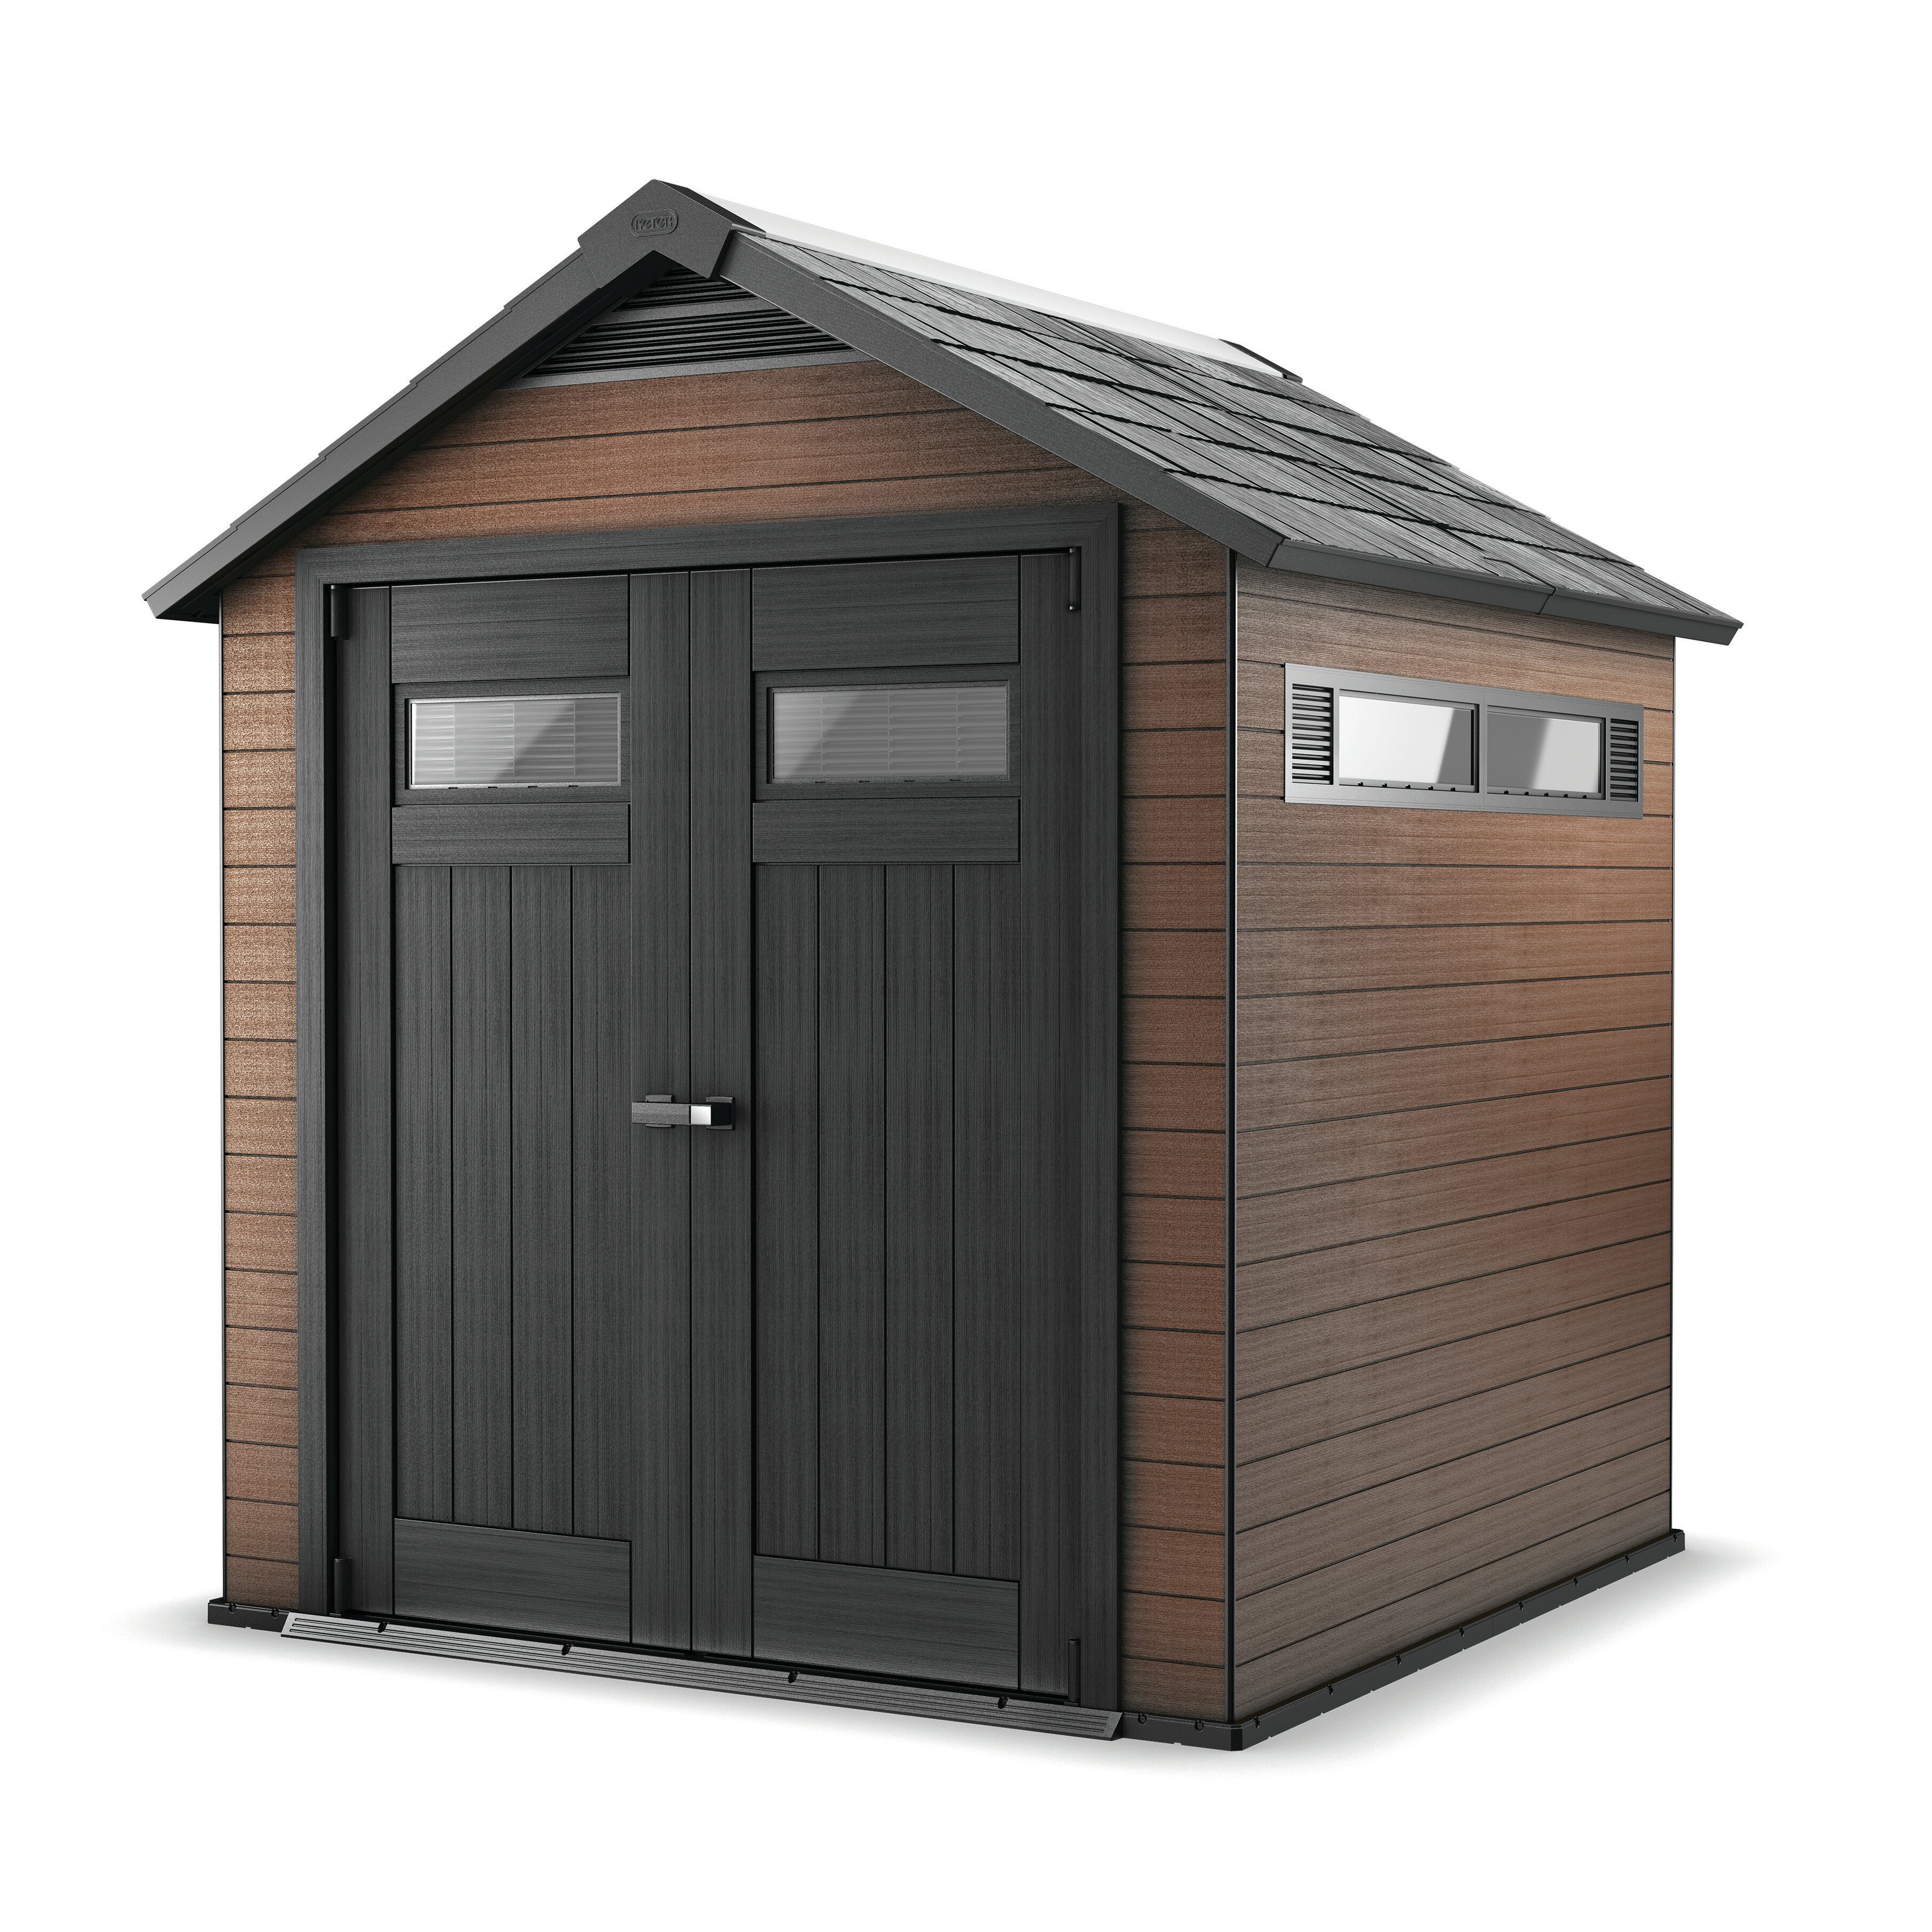 Keter Fusion 7.5 Ft. W x 7 Ft. D Wood Plastic Composite Outdoor Storage Shed \u0026 Reviews 